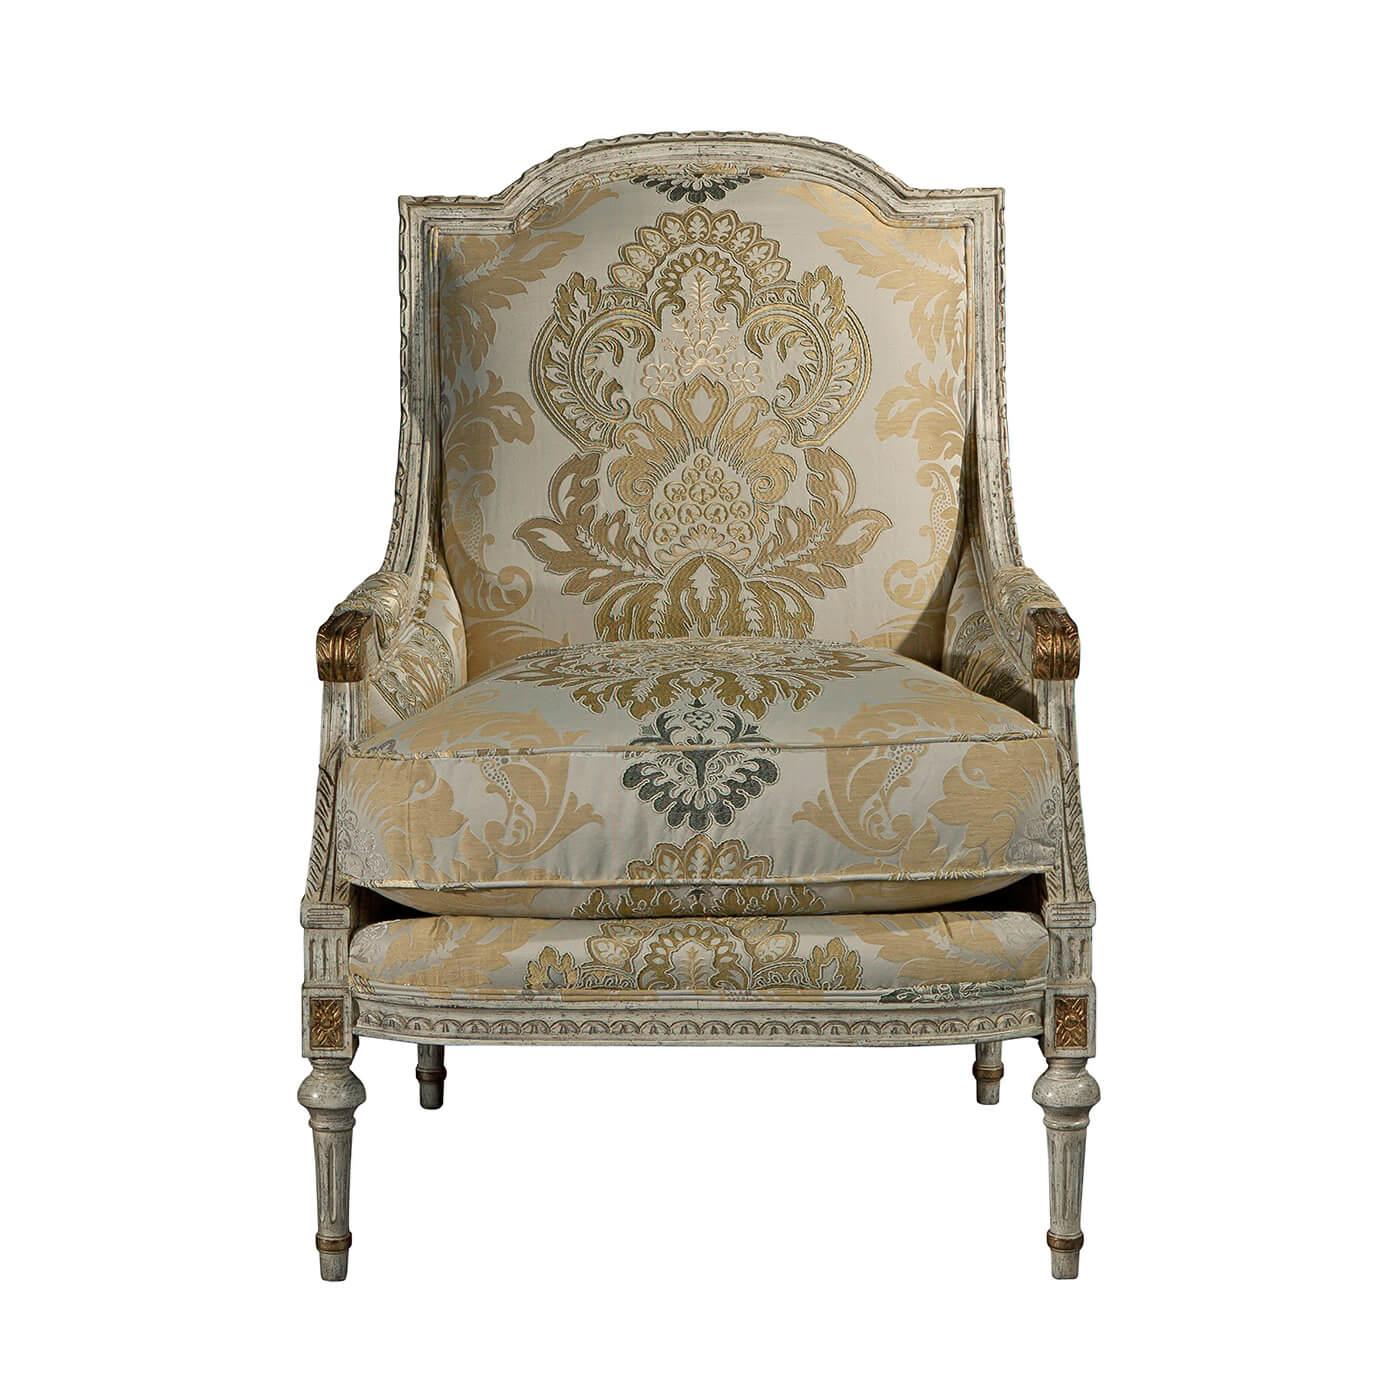 A finely carved fauteuil, the paper twist carved, arched top rail and downswept padded arms with scroll terminals enclosing an upholstered back and cushion seat, on a finely carved seat rail with flowerhead capitals to the turned and fluted legs.